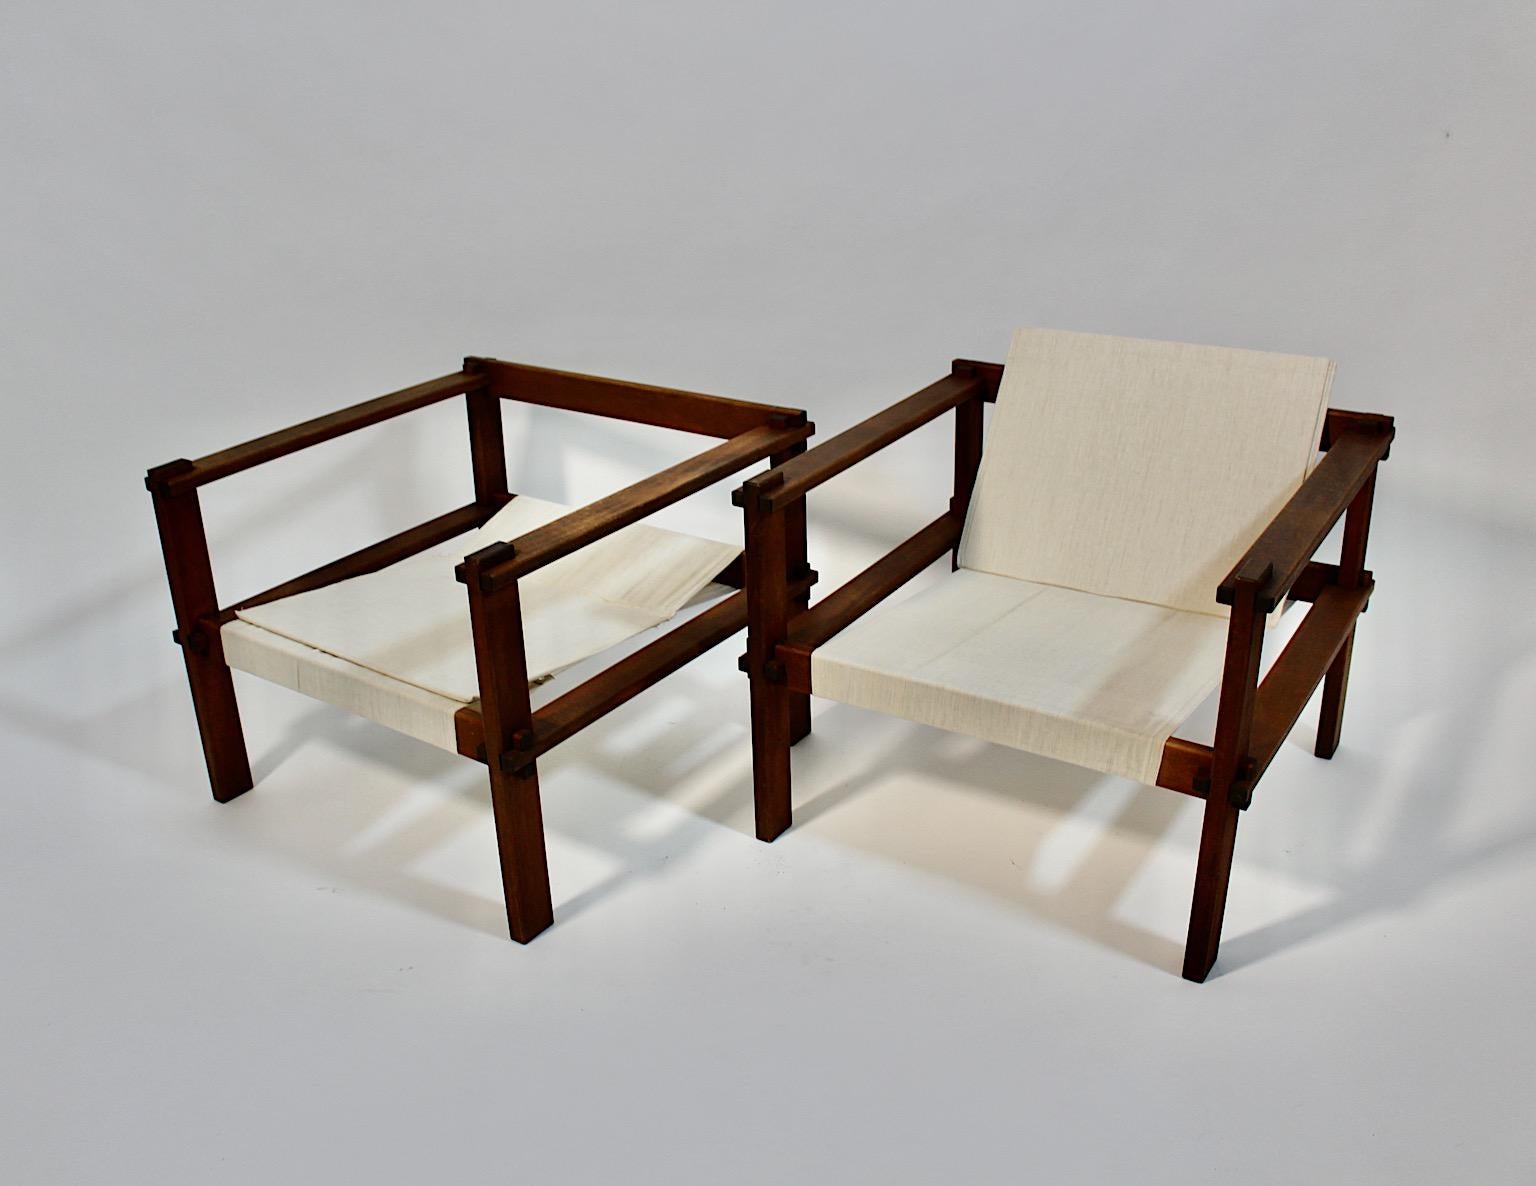 Bauhaus Pair Duo Beech Canvas Geometric Lounge Chairs 1920s Germany For Sale 3